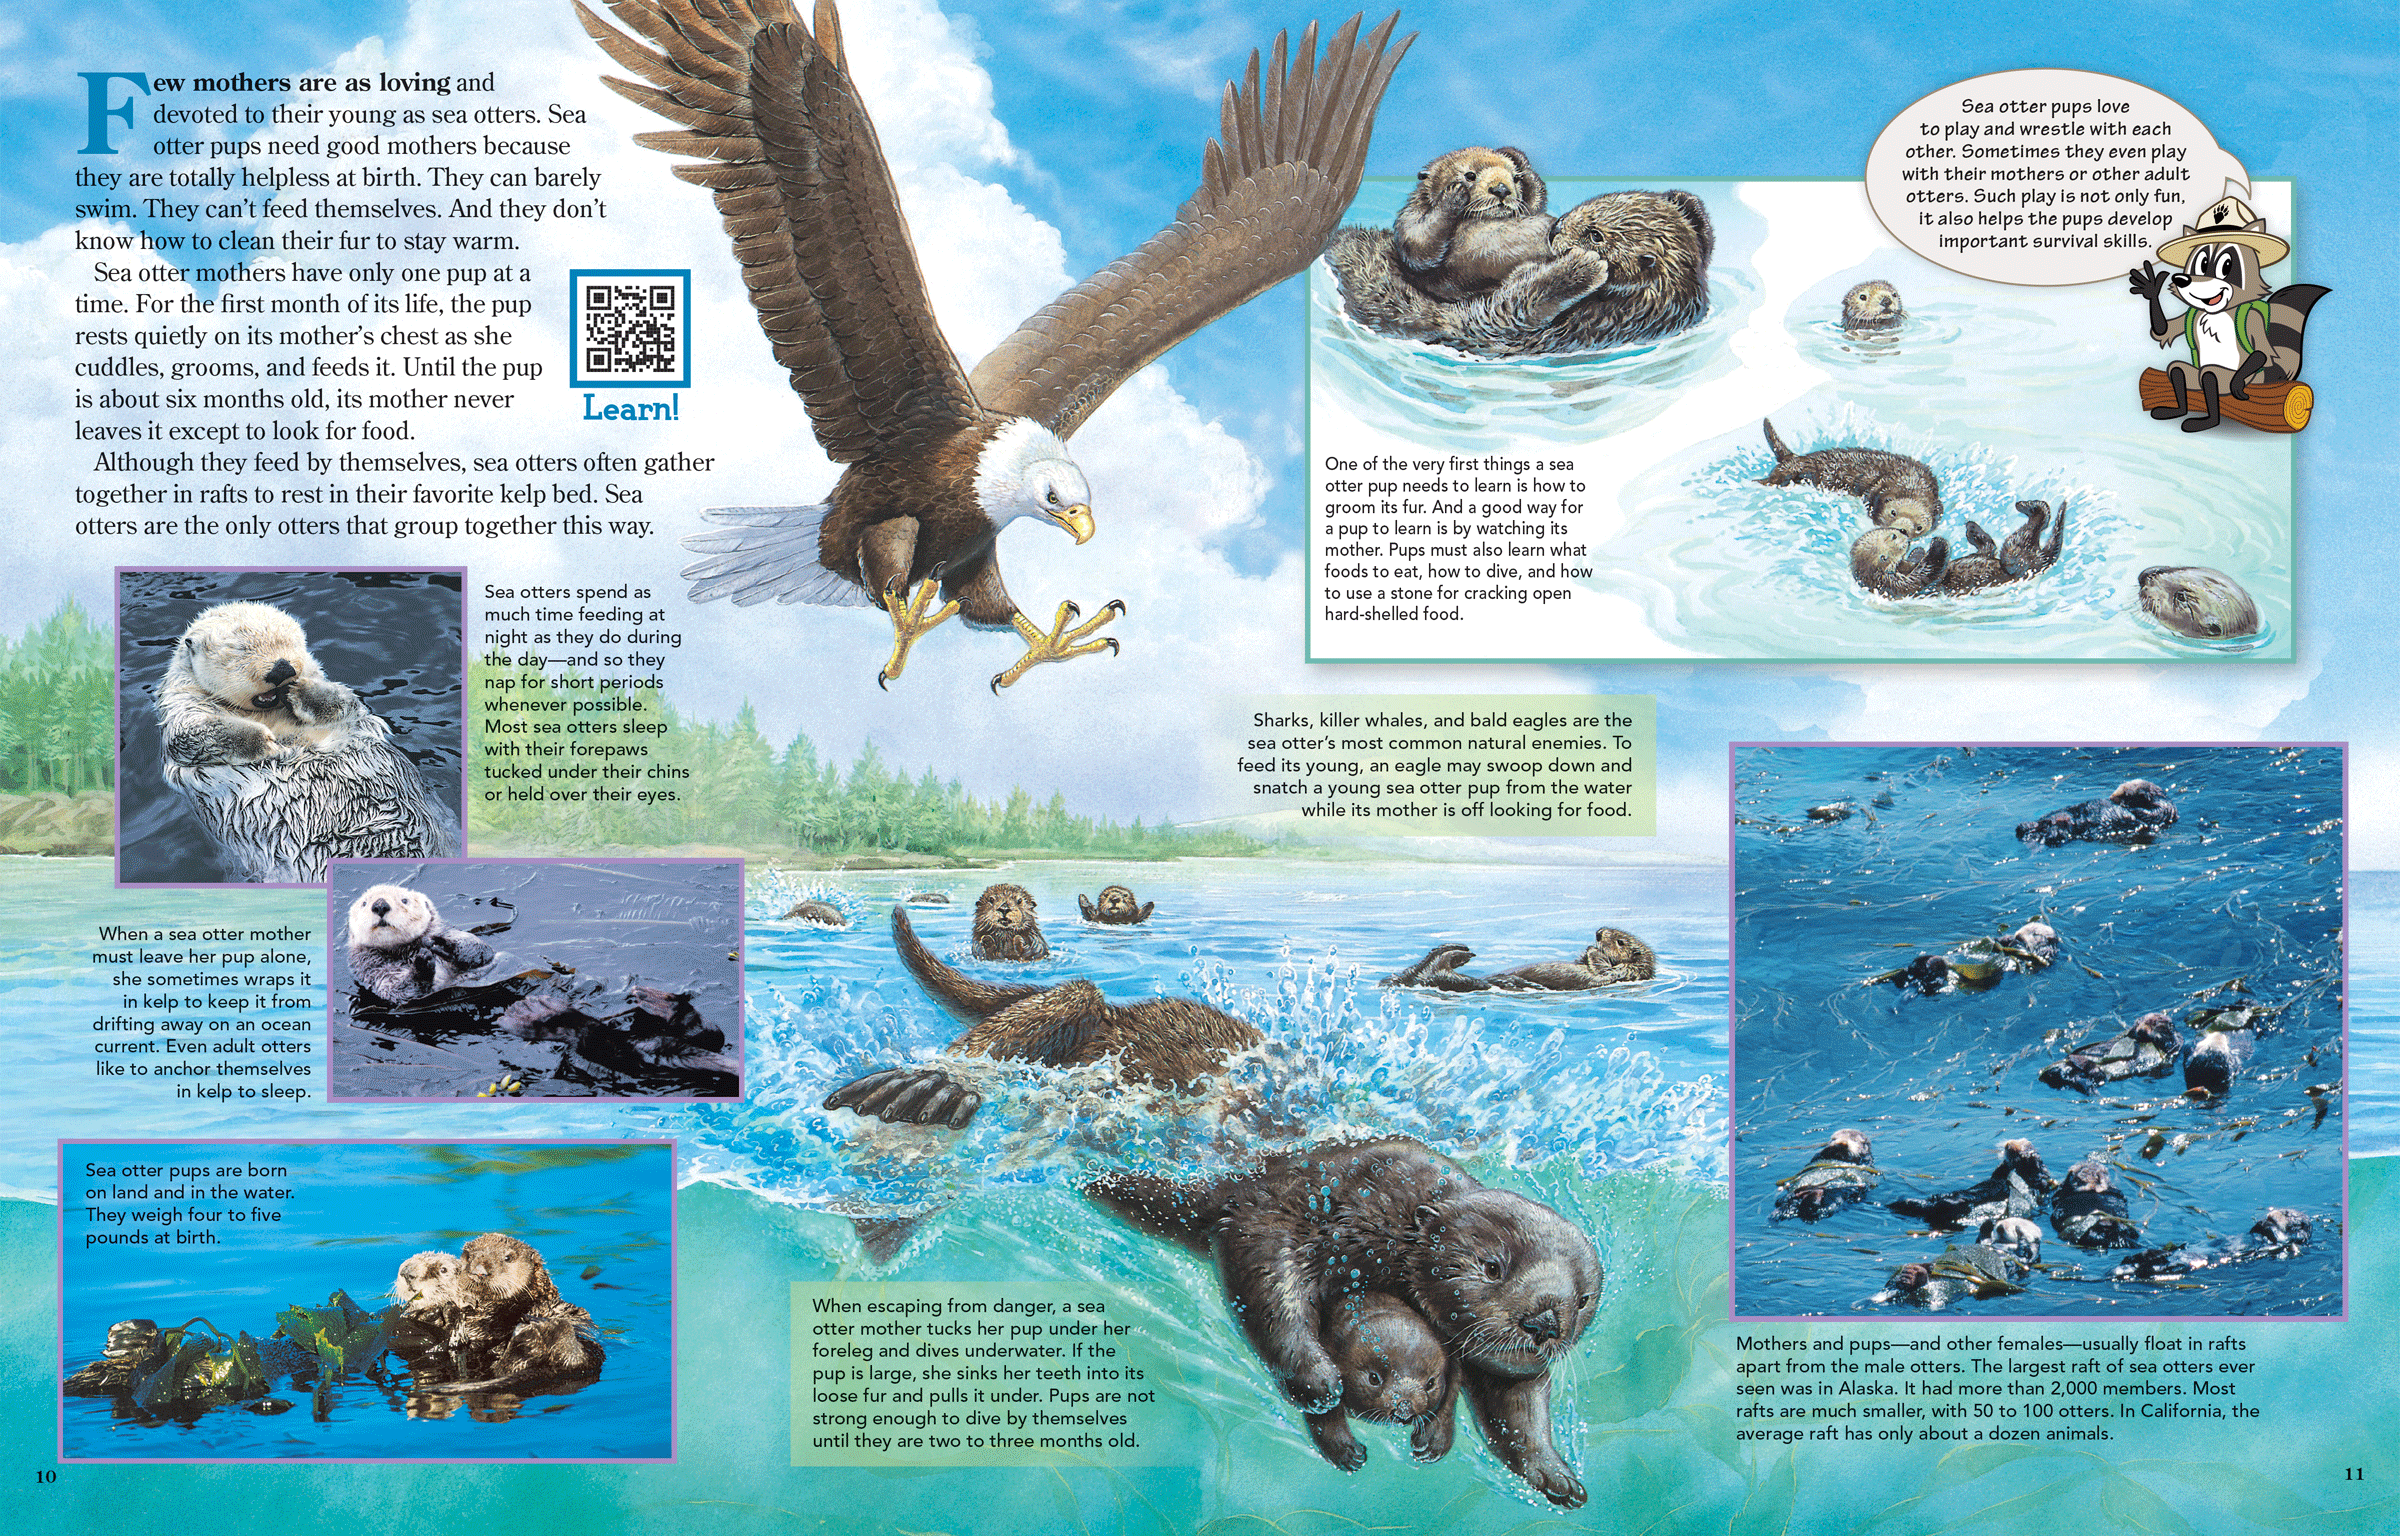 Two Zoobooks Sea Otters pages showing an eagle trying to steal a sea otter pup.